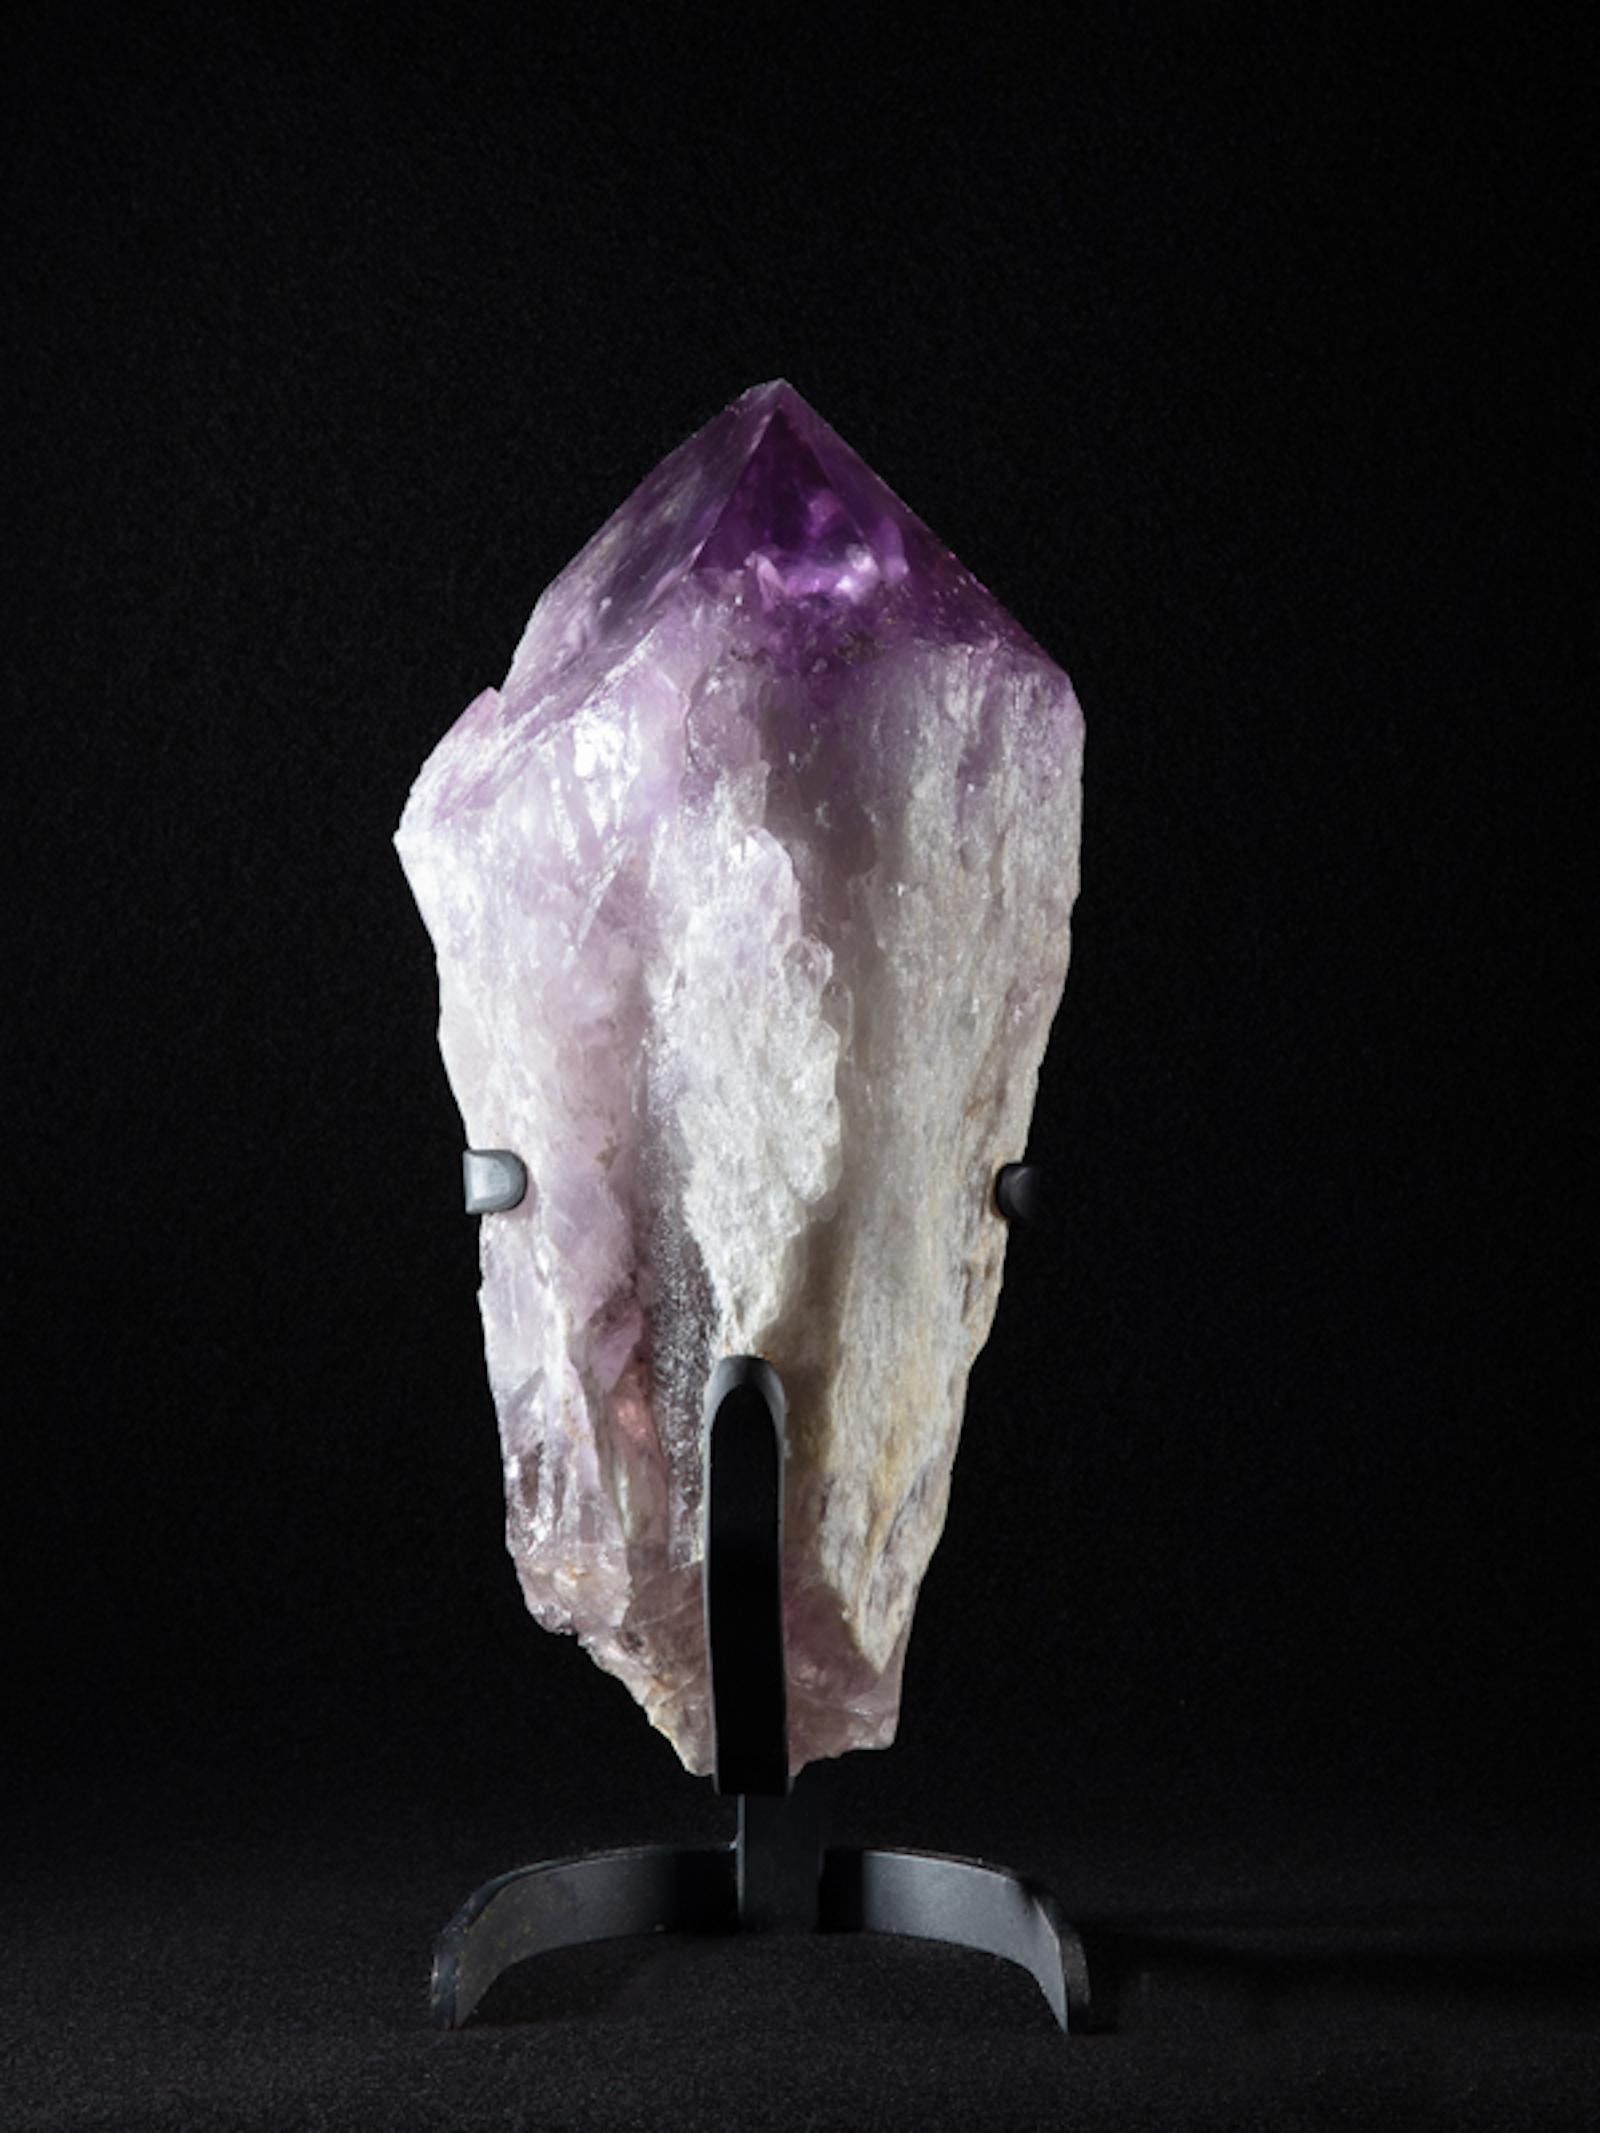 Amethyst is a quartz containing traces of manganese oxide are responsible for the violet color. Amethyst is usually found in cavities of volcanic rock and is also present in ore corridors. The name amethyst comes from the Greek and means 